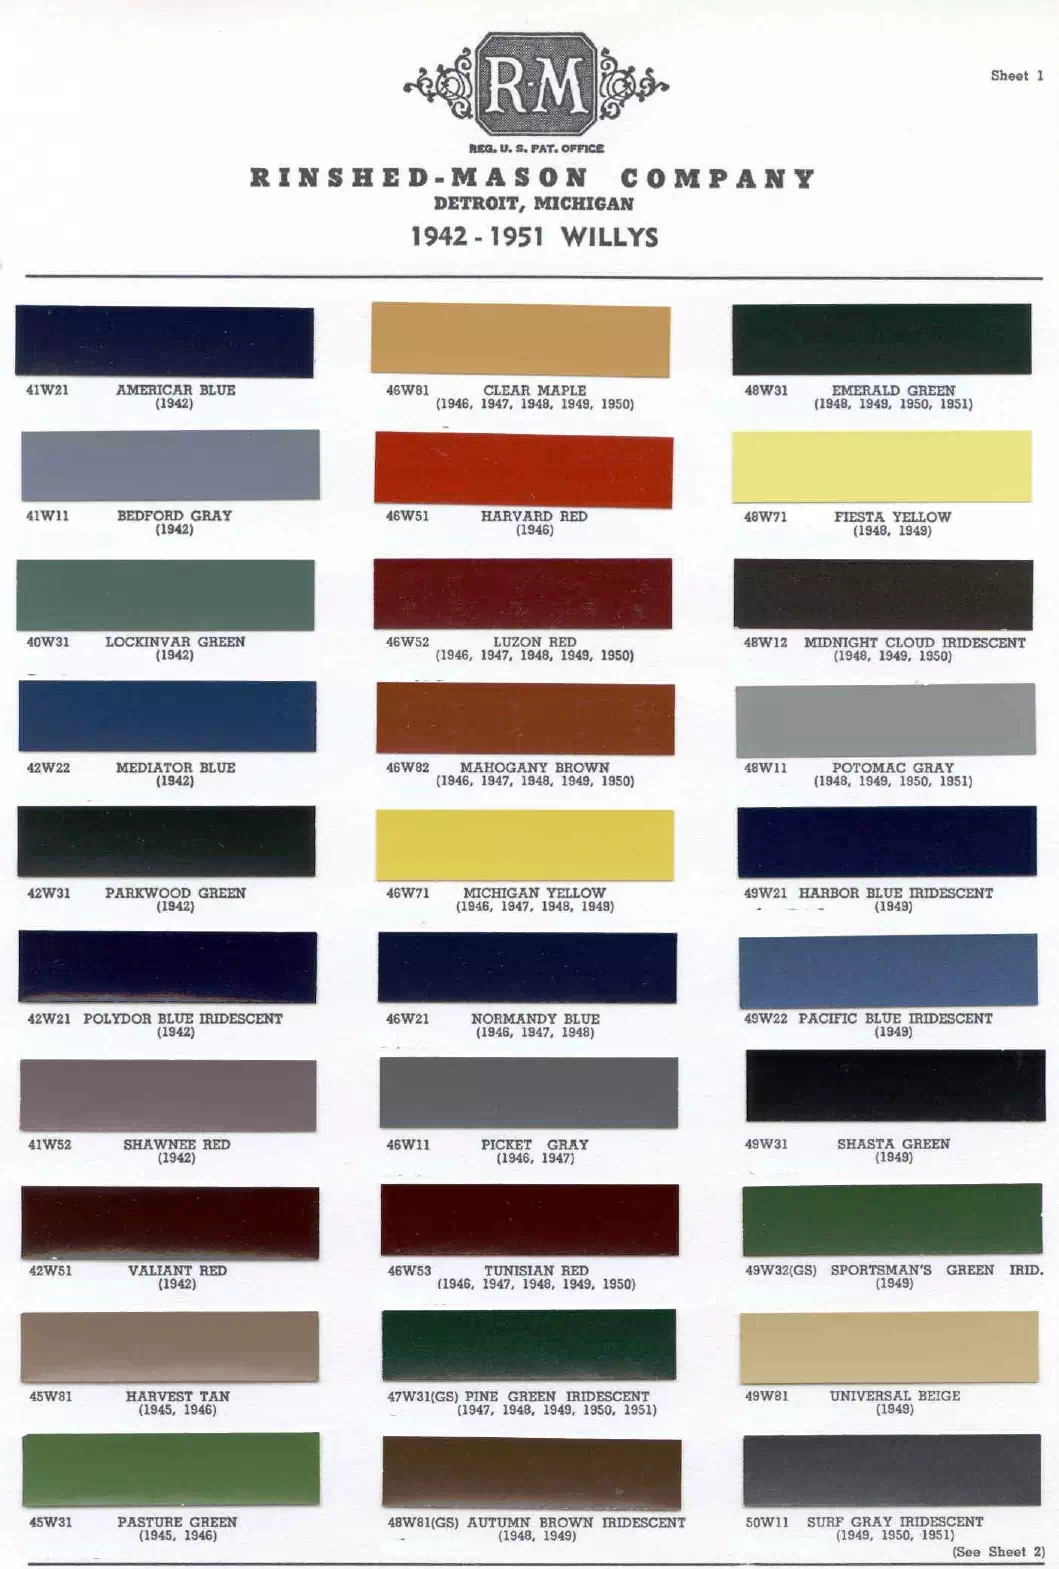 1942, 1946, 1947, 1948, 1949, 1950 & 1951 Willy's Paint Codes & Color Chart